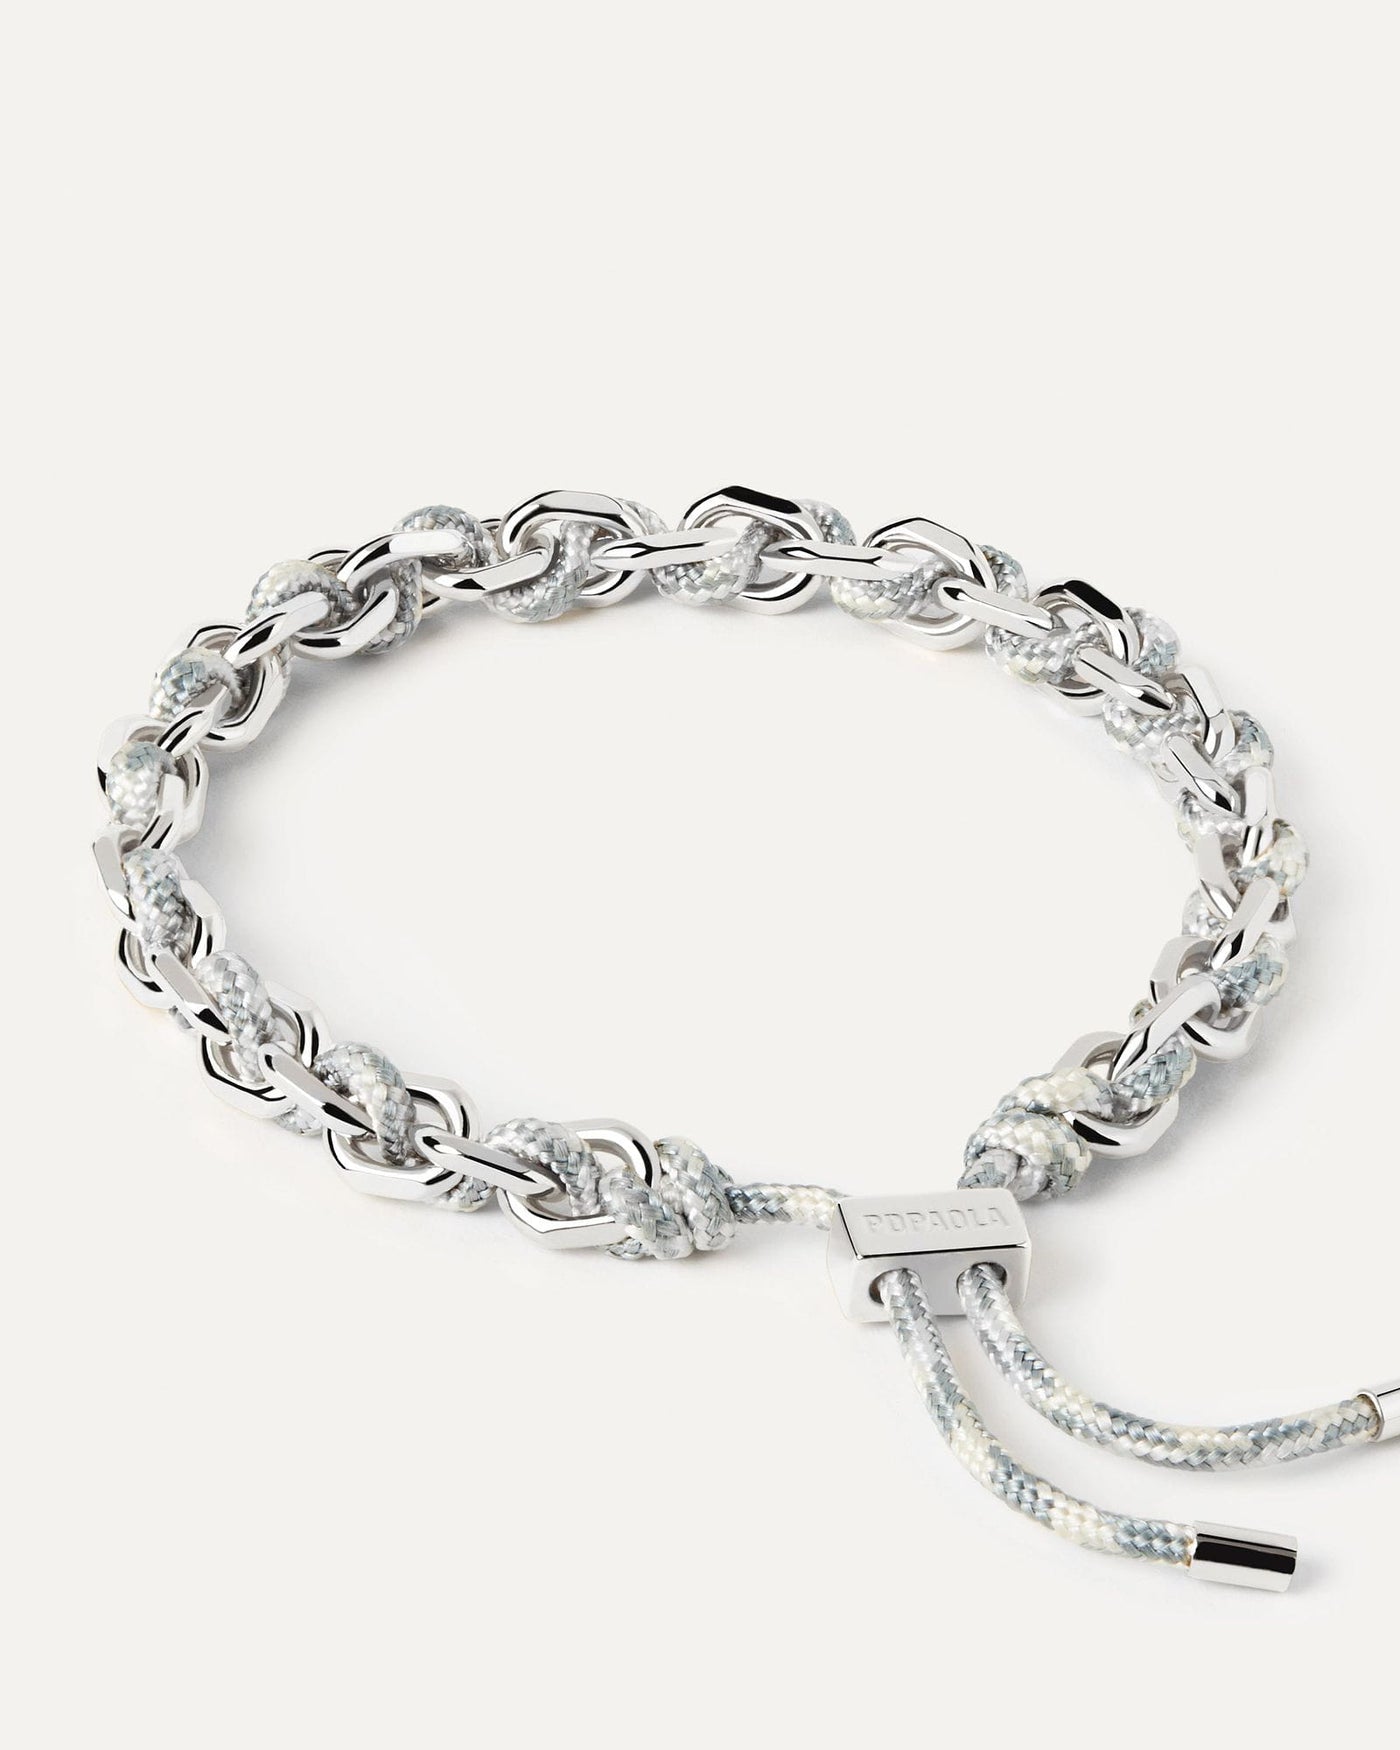 2024 Selection | Sky Rope and Chain Silver Bracelet. Silver chain bracelet with a blue and white rope adjustable sliding clasp. Get the latest arrival from PDPAOLA. Place your order safely and get this Best Seller. Free Shipping.